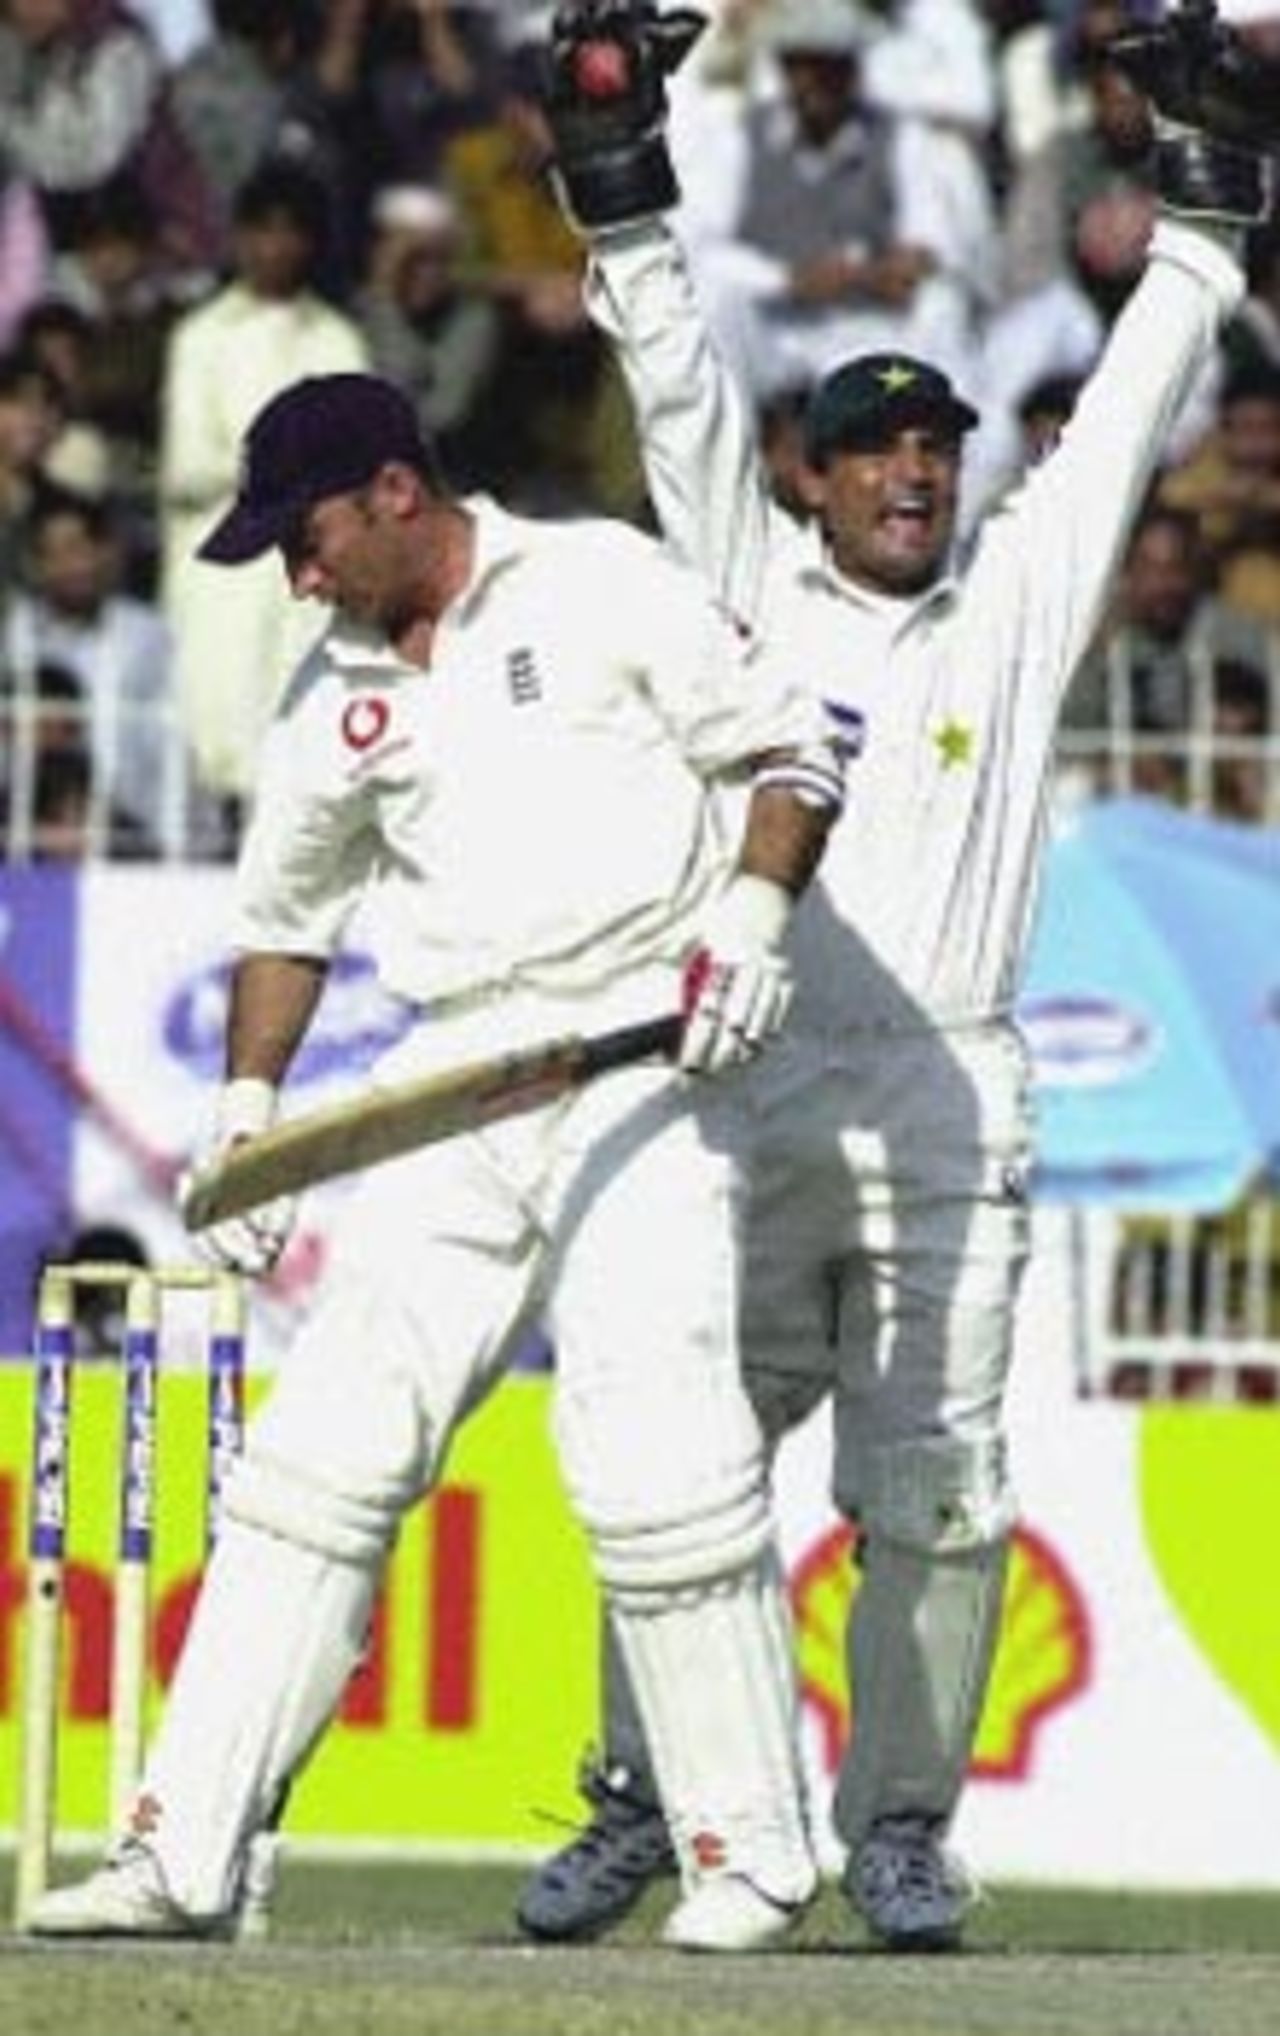 Nasser Hussain can't bear to look as Moin Khan successfully appeals for his dismissal, England in Pakistan, 2000/01, 2nd Test, Pakistan v England, Iqbal Stadium, Faisalabad, 29Nov-03Dec 2000 (Day 5).